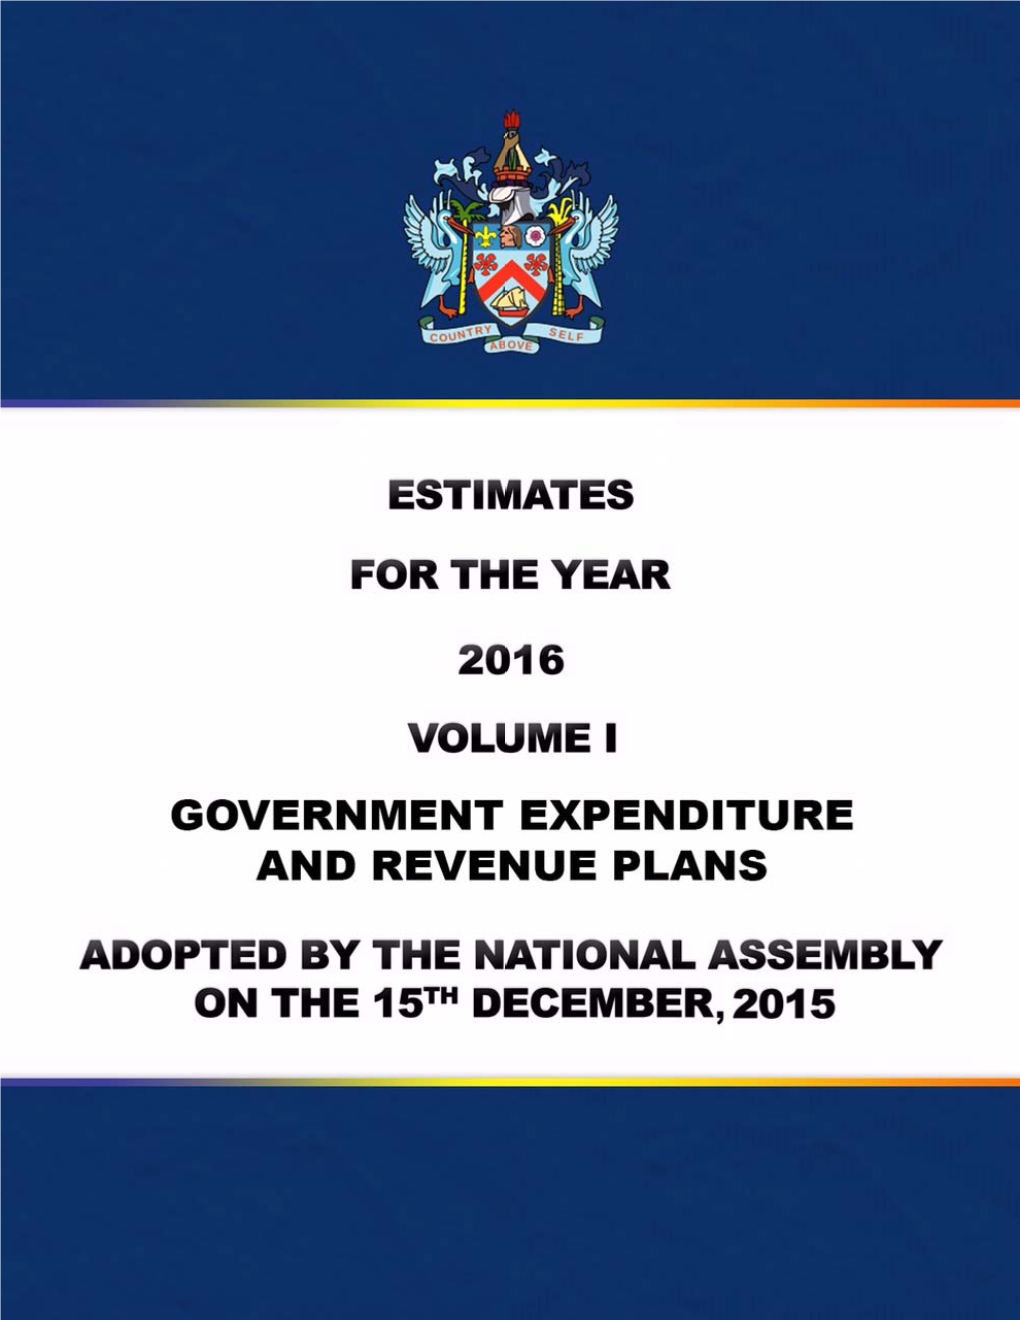 St. Kitts and Nevis Estimates, 2016